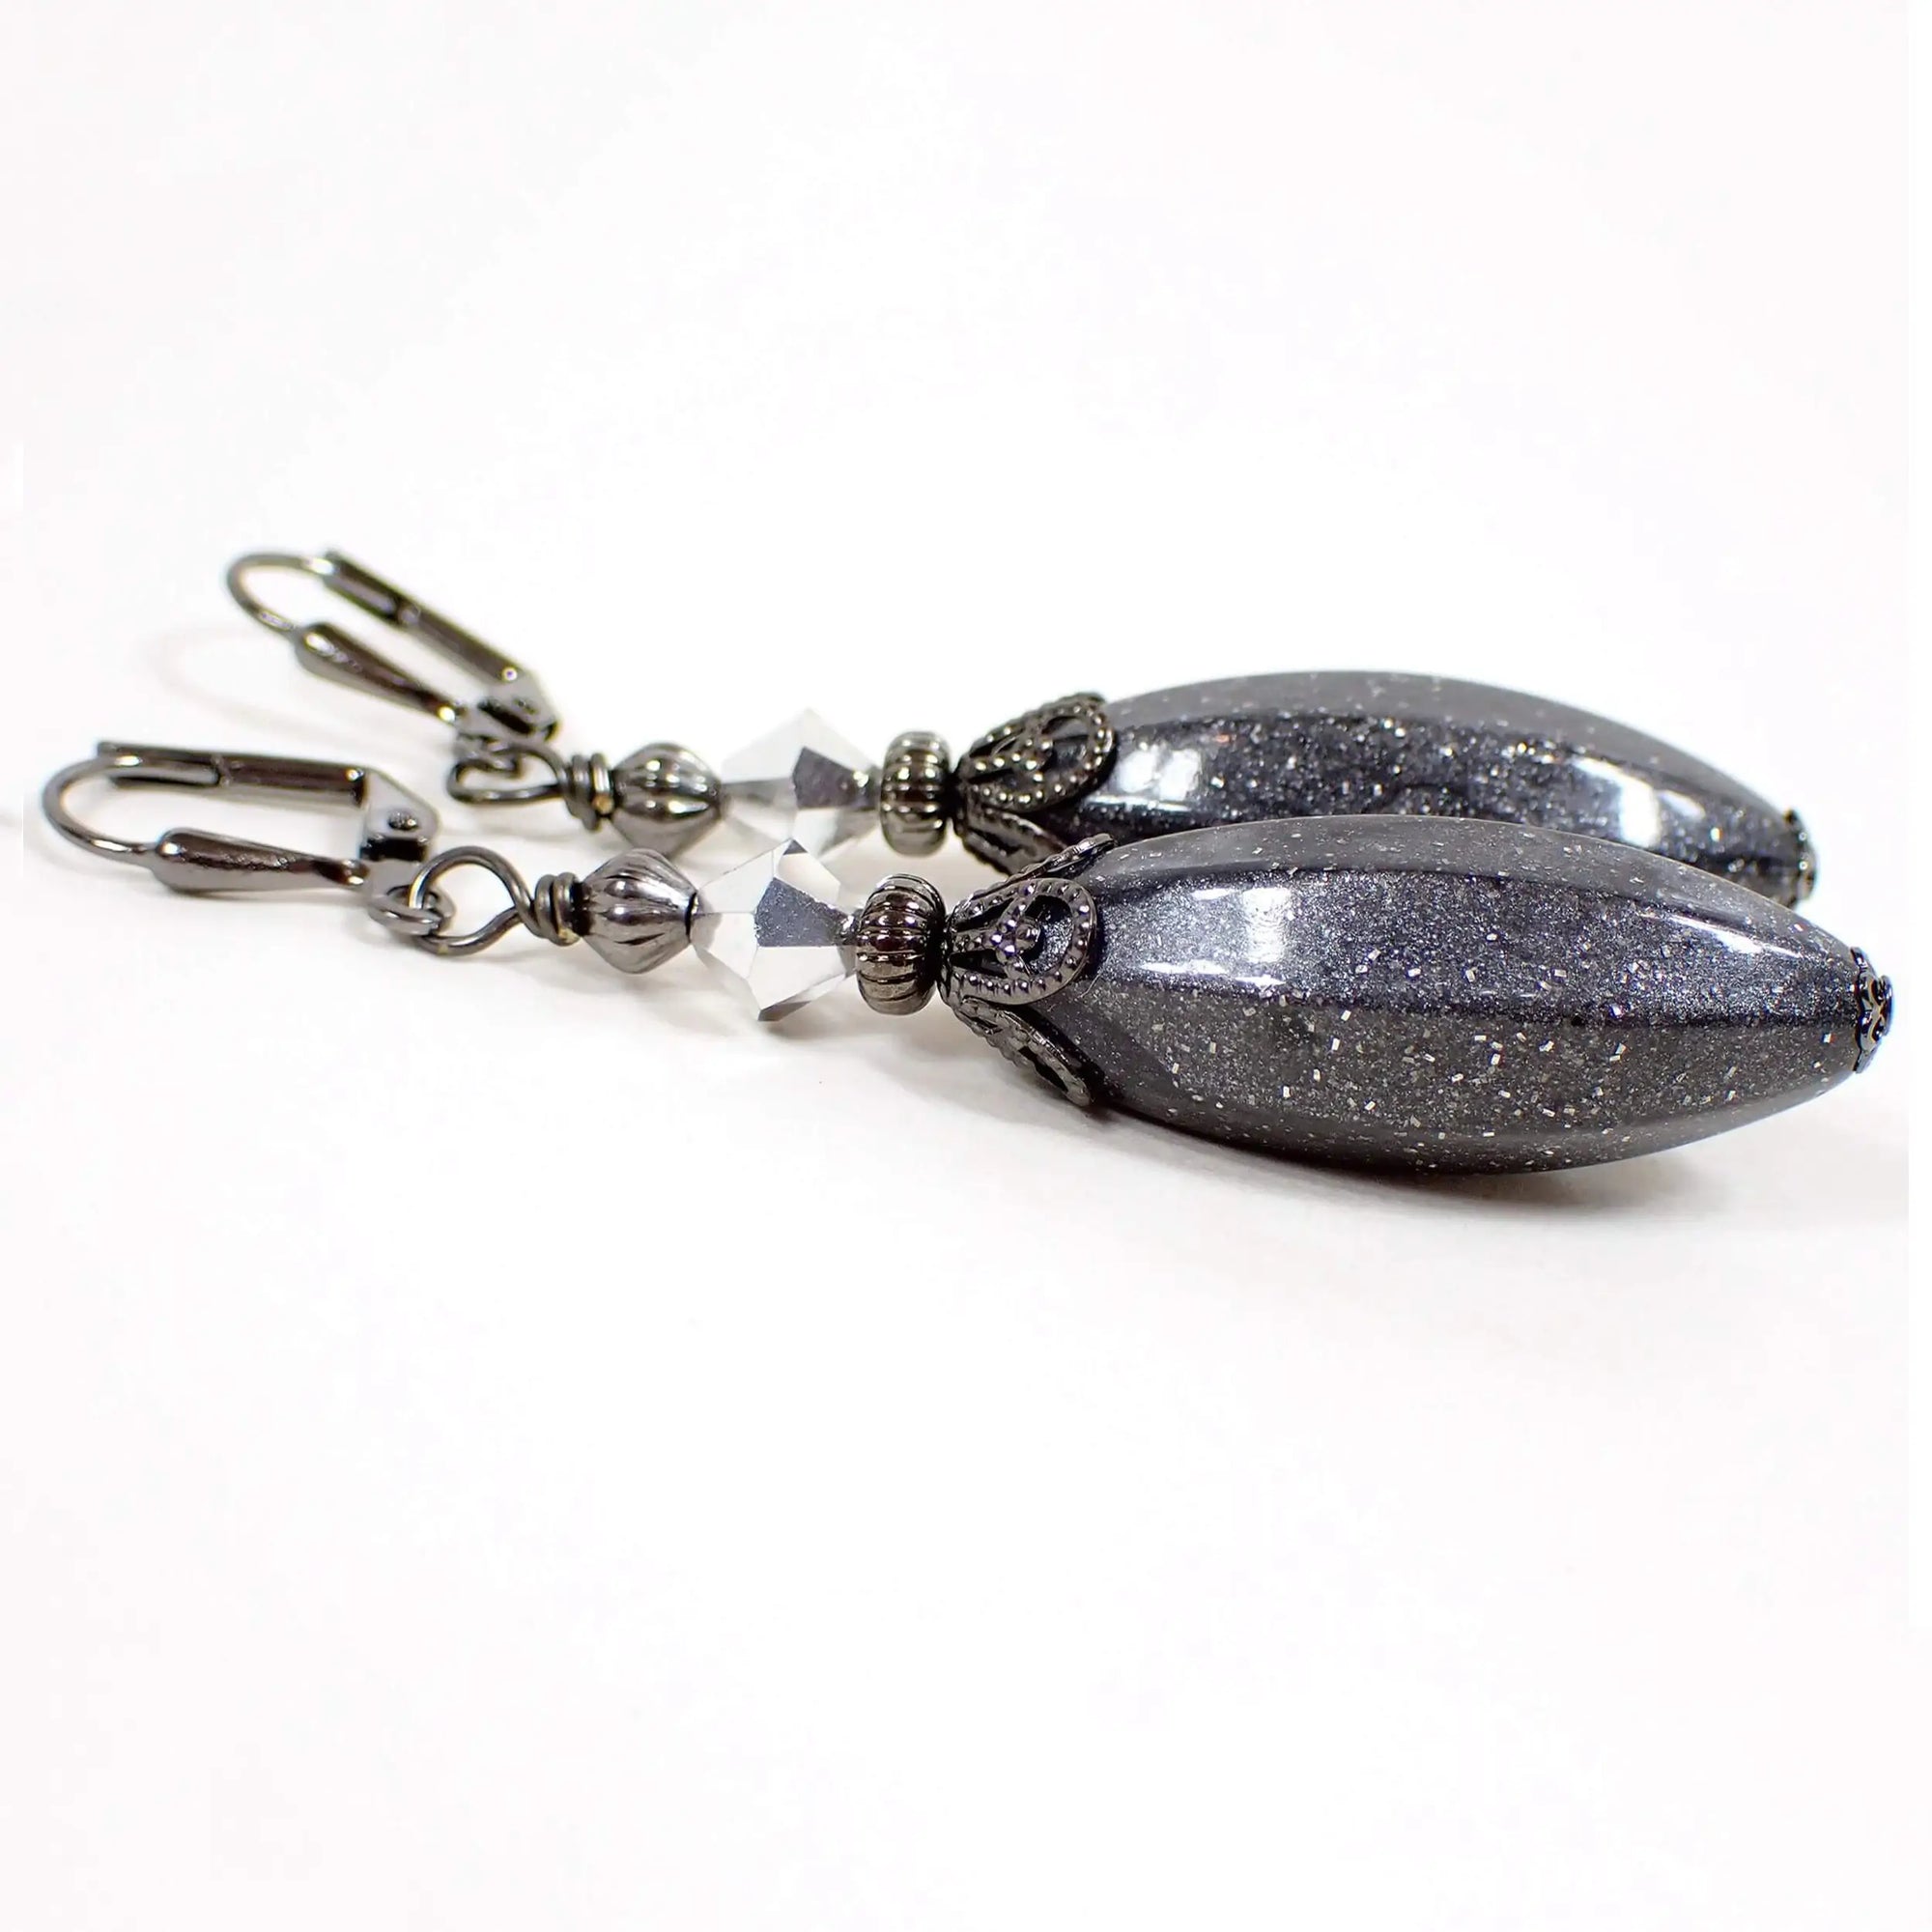 Angled view of the large handmade drop earrings with vintage lucite beads. The metal is gunmetal gray in color. There are faceted clear and metallic silver glass crystal beads at the top. The bottom lucite beads are a long faceted oval shape and are pearly dark gray in color with tiny flecks of glitter embedded in them.